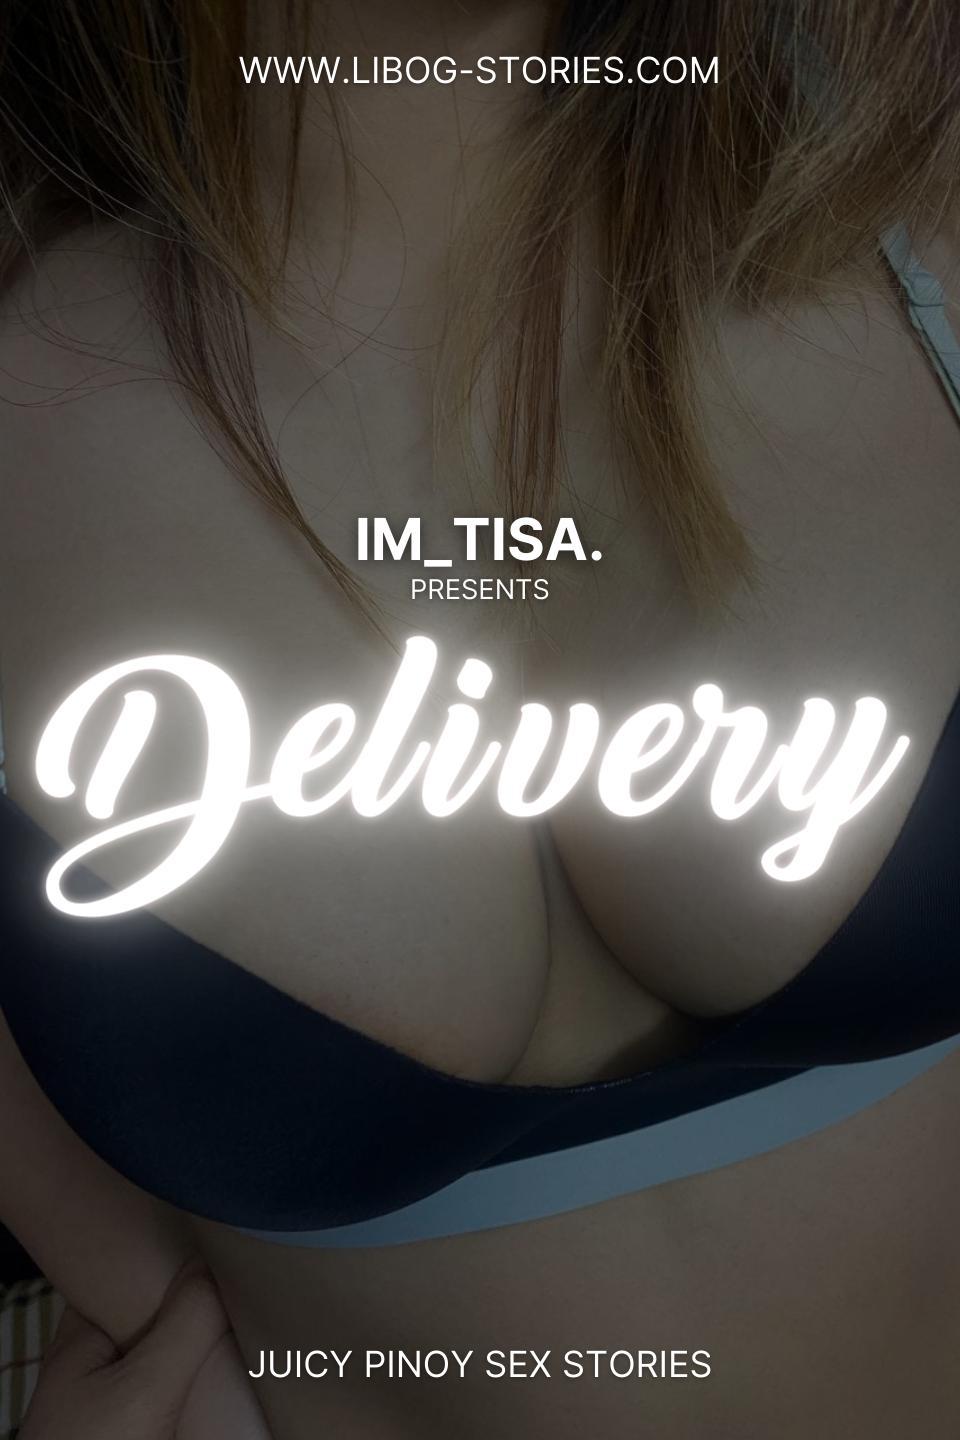 Ss- Delivery